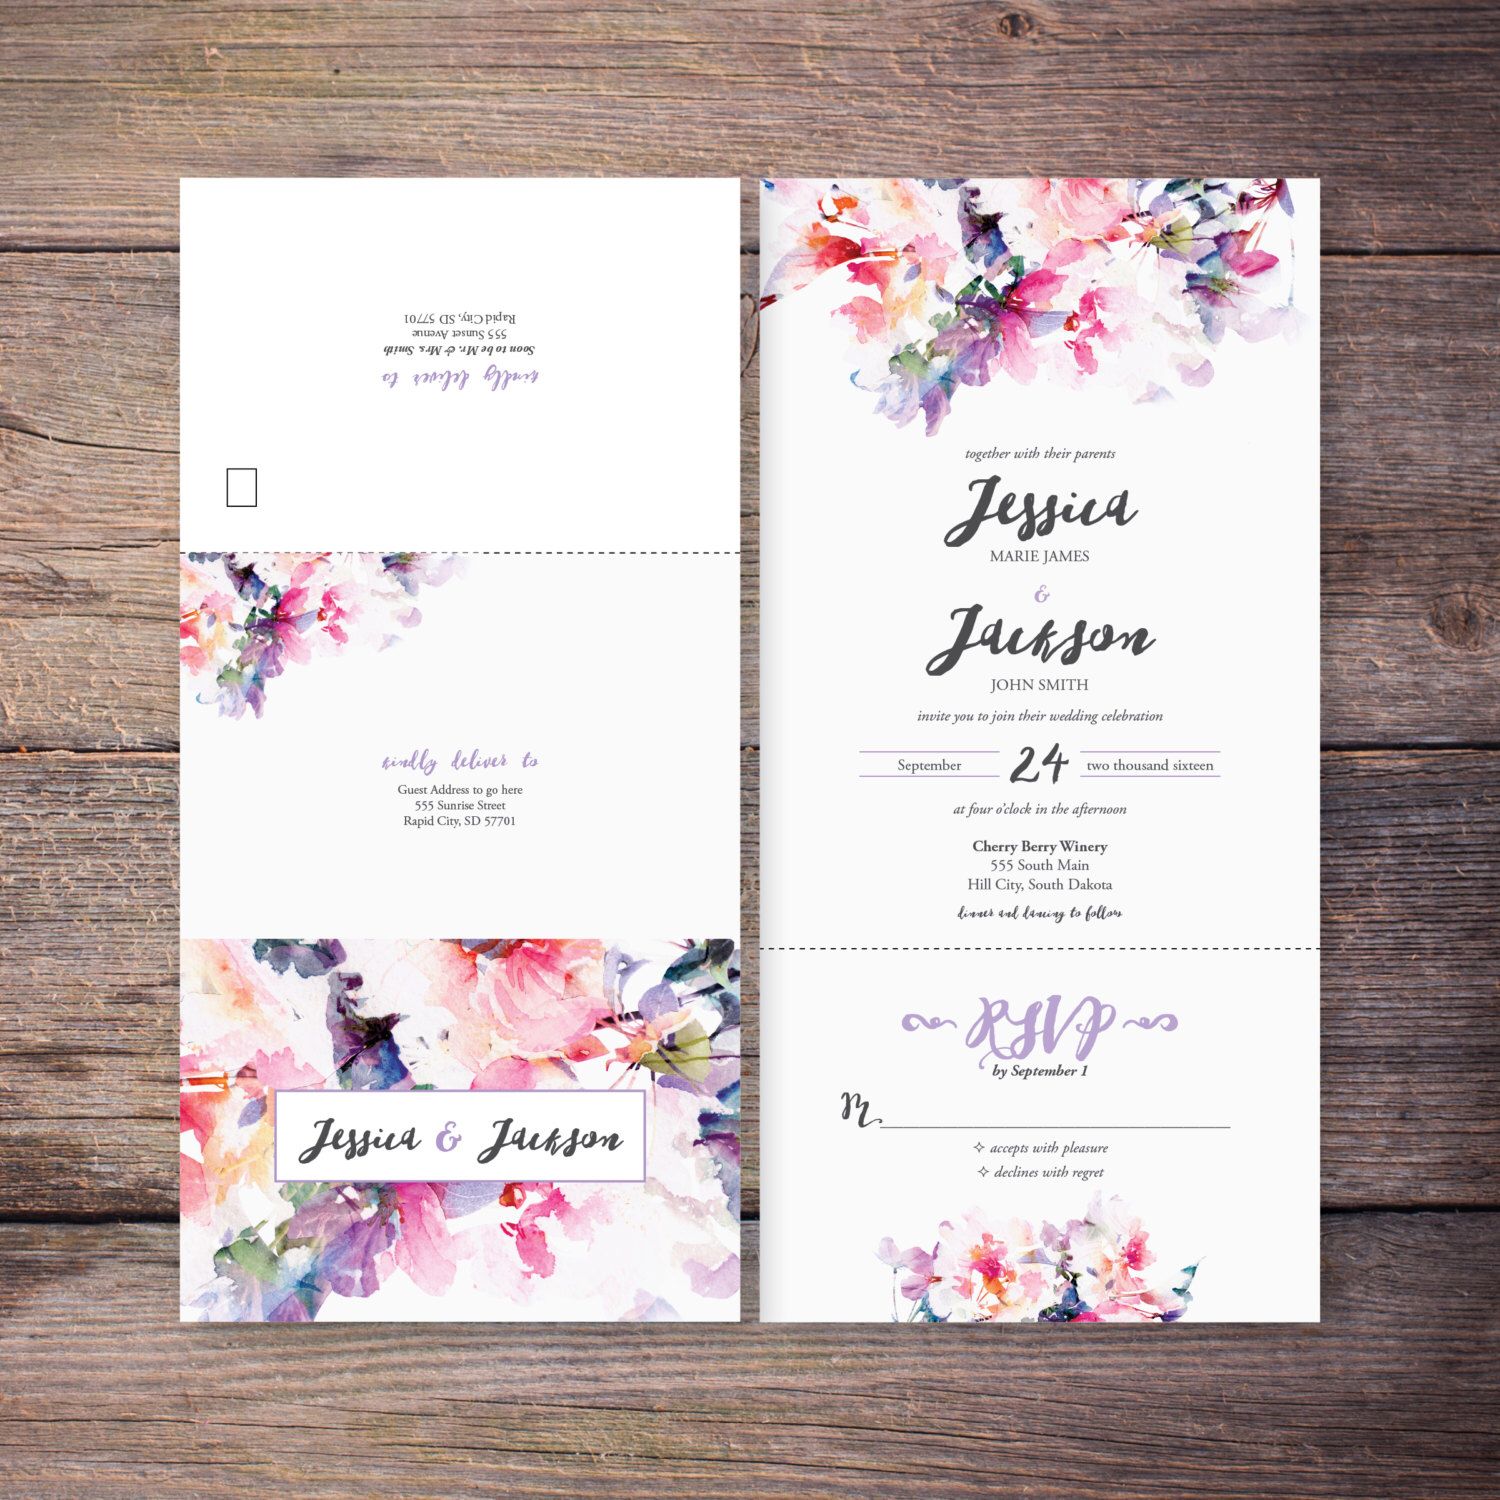 All In One Wedding Invitation Seal And Send Include In